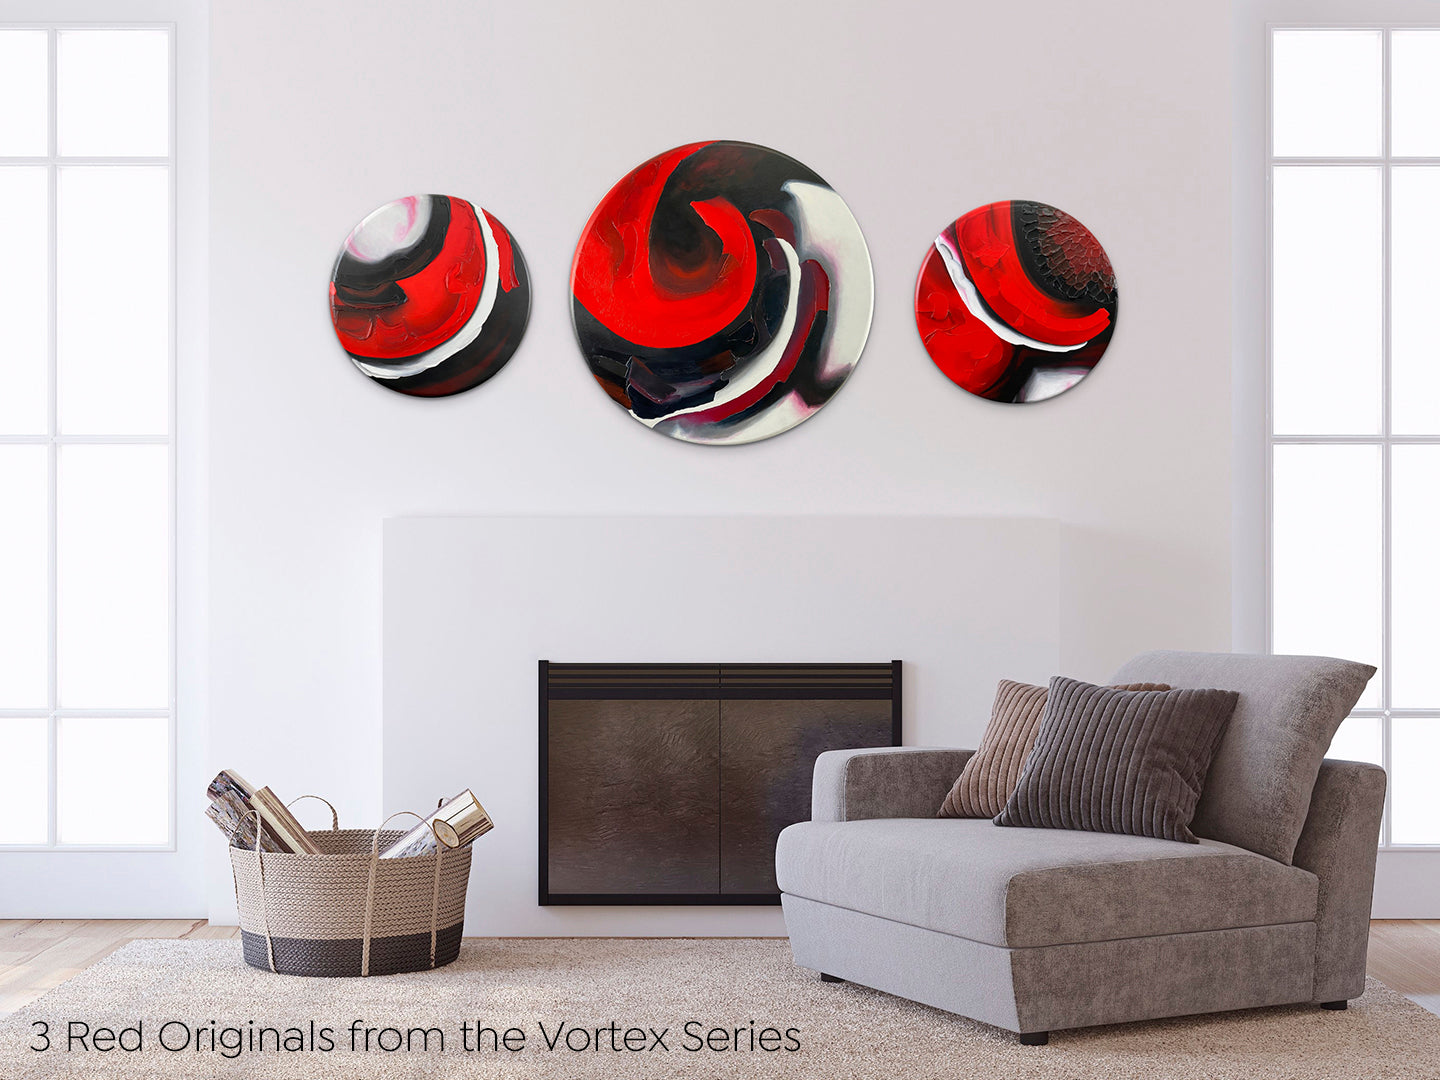 Showing the 3 red companion paintings in this abstract, acrylic and mixed-media series on a on a white wall above a fireplace.